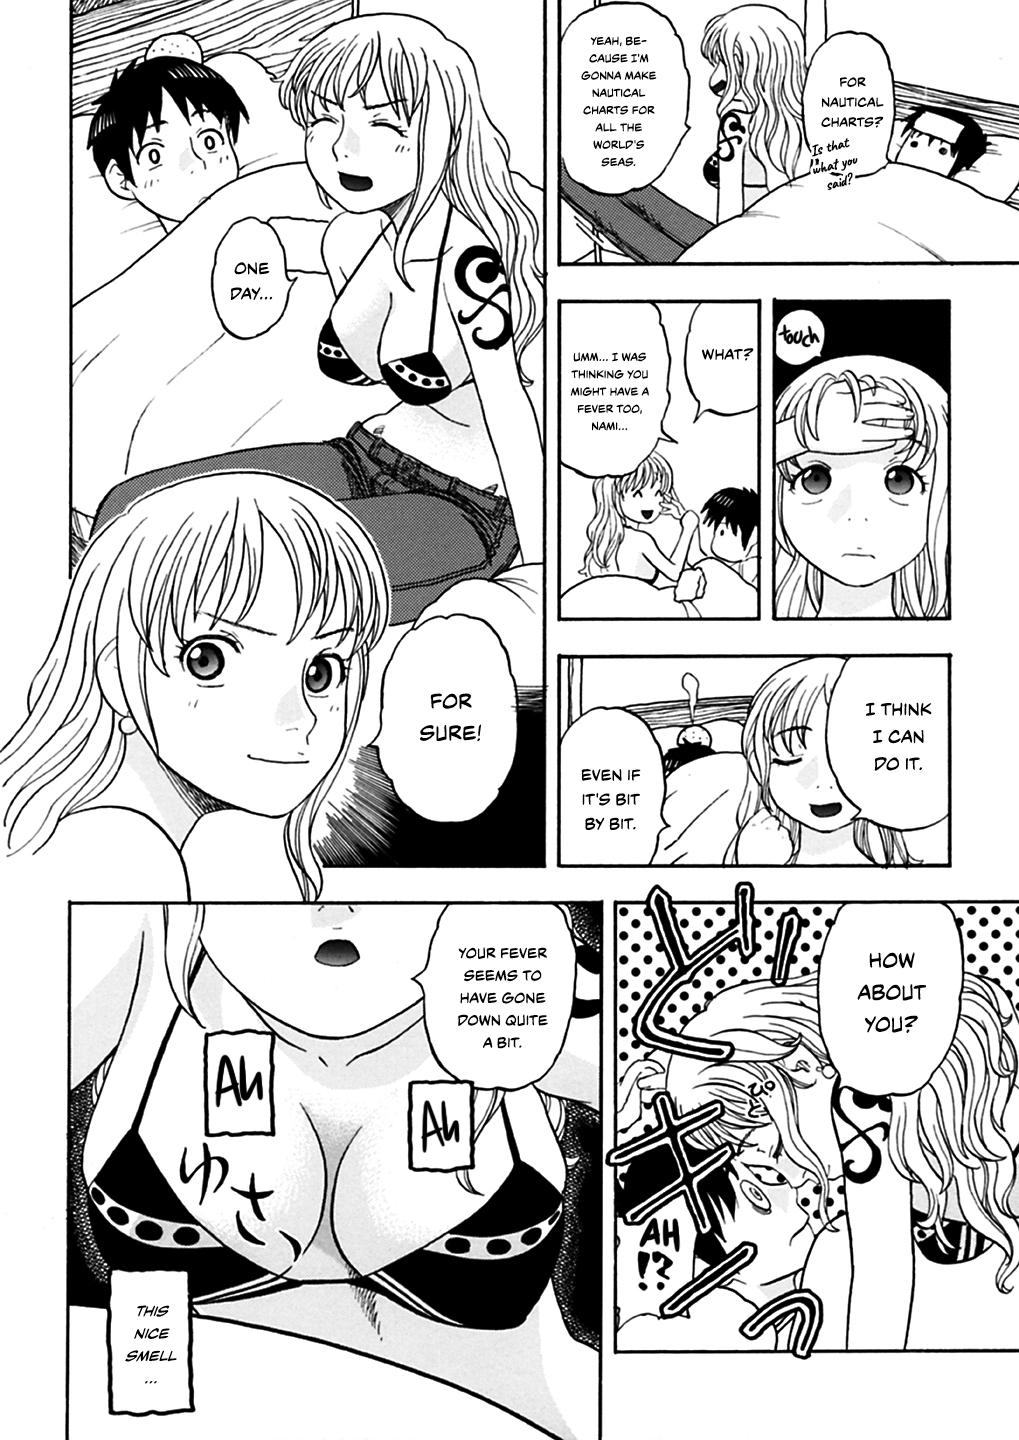 Red Head Nami to Ecchi | Sex with Nami - One piece Gay Hardcore - Page 5